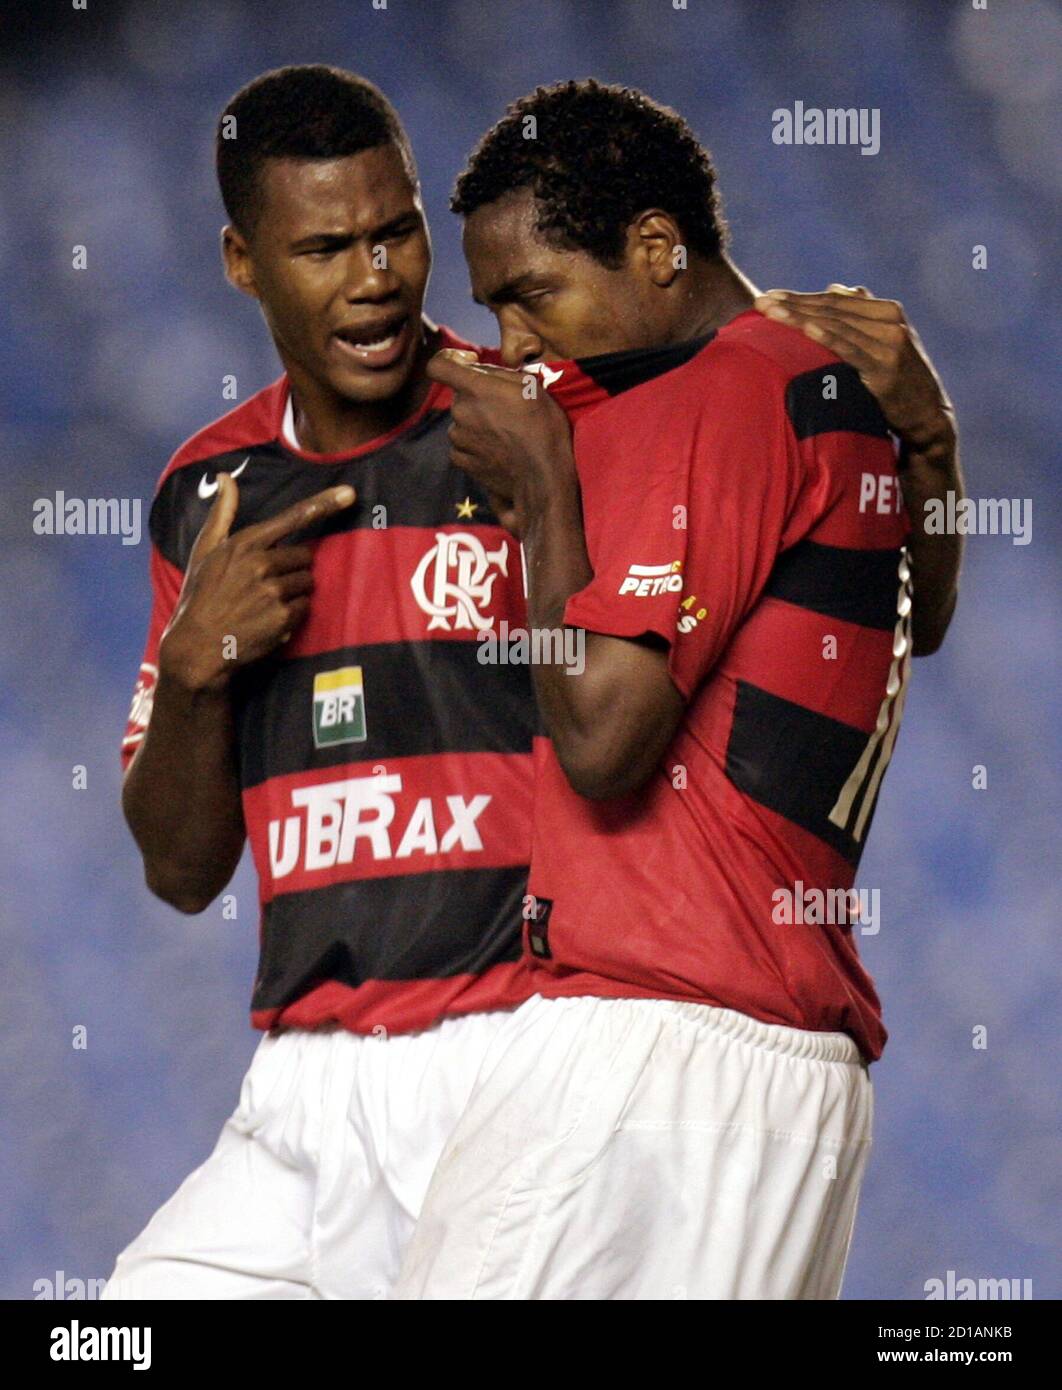 Flamengo's Renato (R) celebrates with team mate Vinicius after scoring his goal against Ipatinga during their second leg of their Brazil Cup semi-final soccer match at the Maracana stadium in Rio de Janeiro, May 18, 2006.   REUTERS/Sergio Moraes Stock Photo